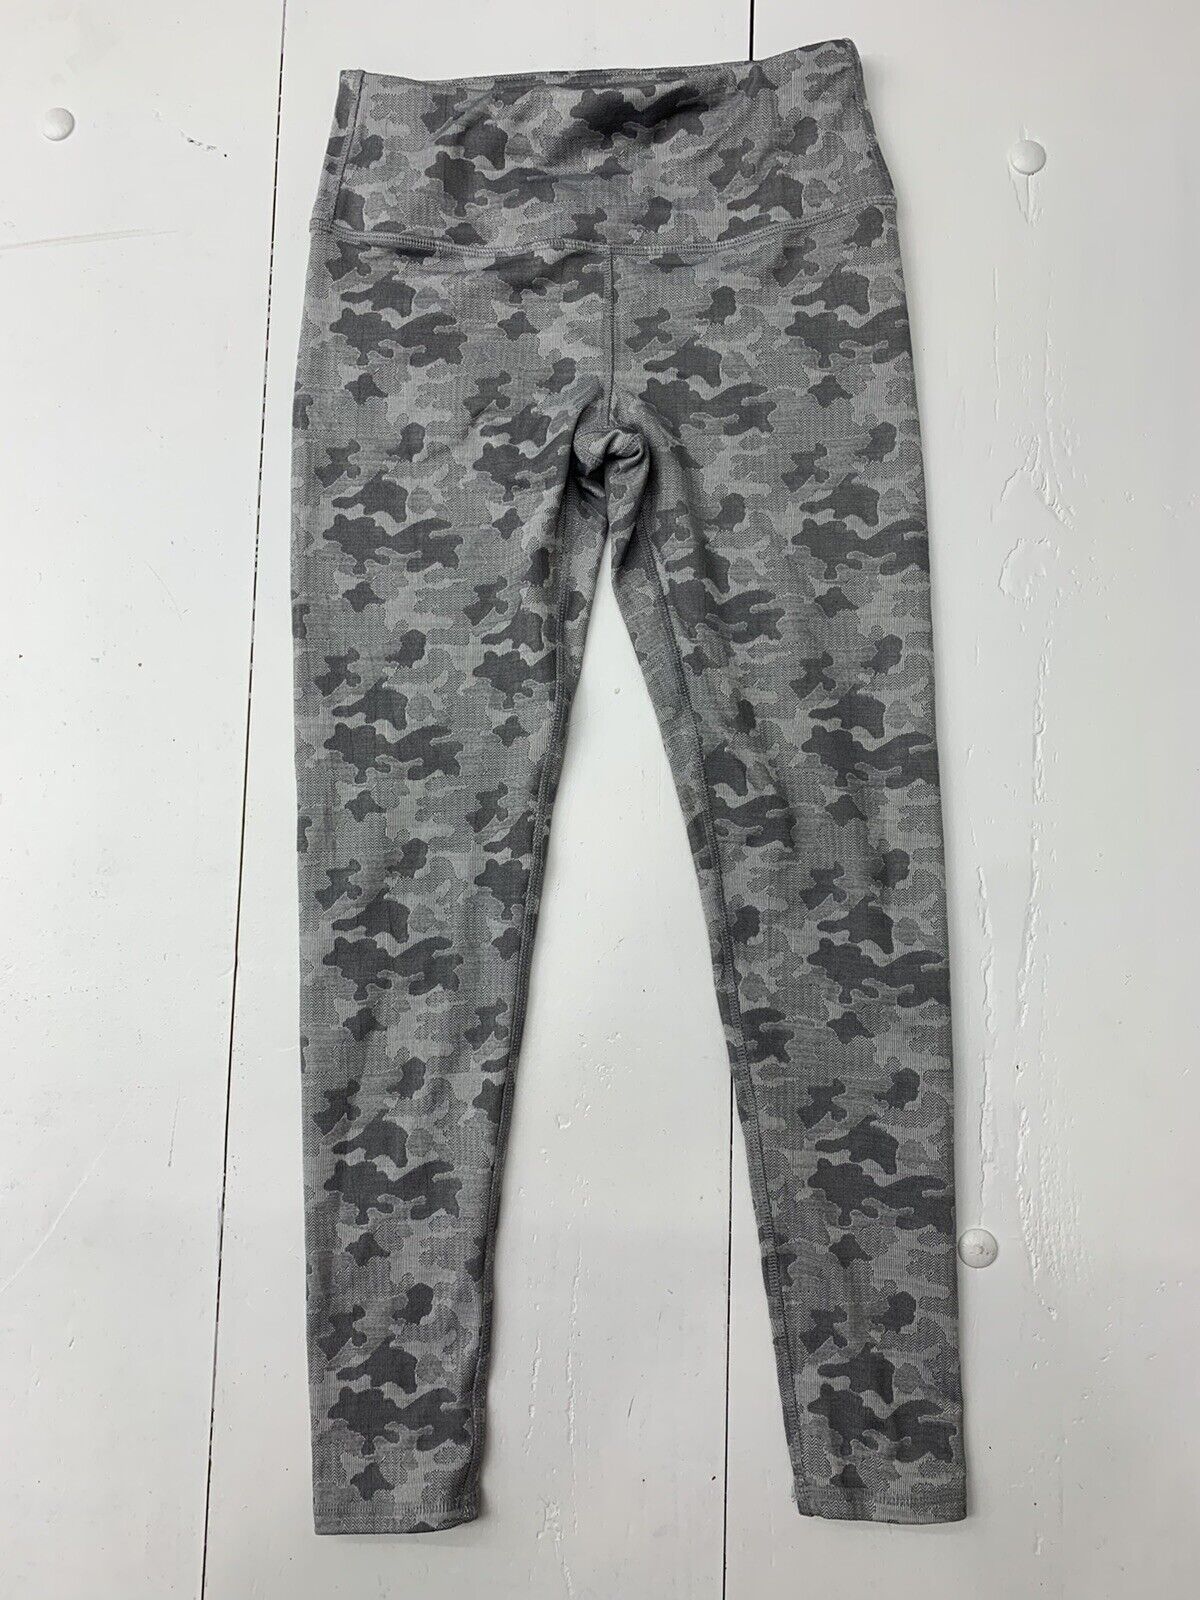 Kyodan Womens Grey Camouflage Athletic Leggings Size Small